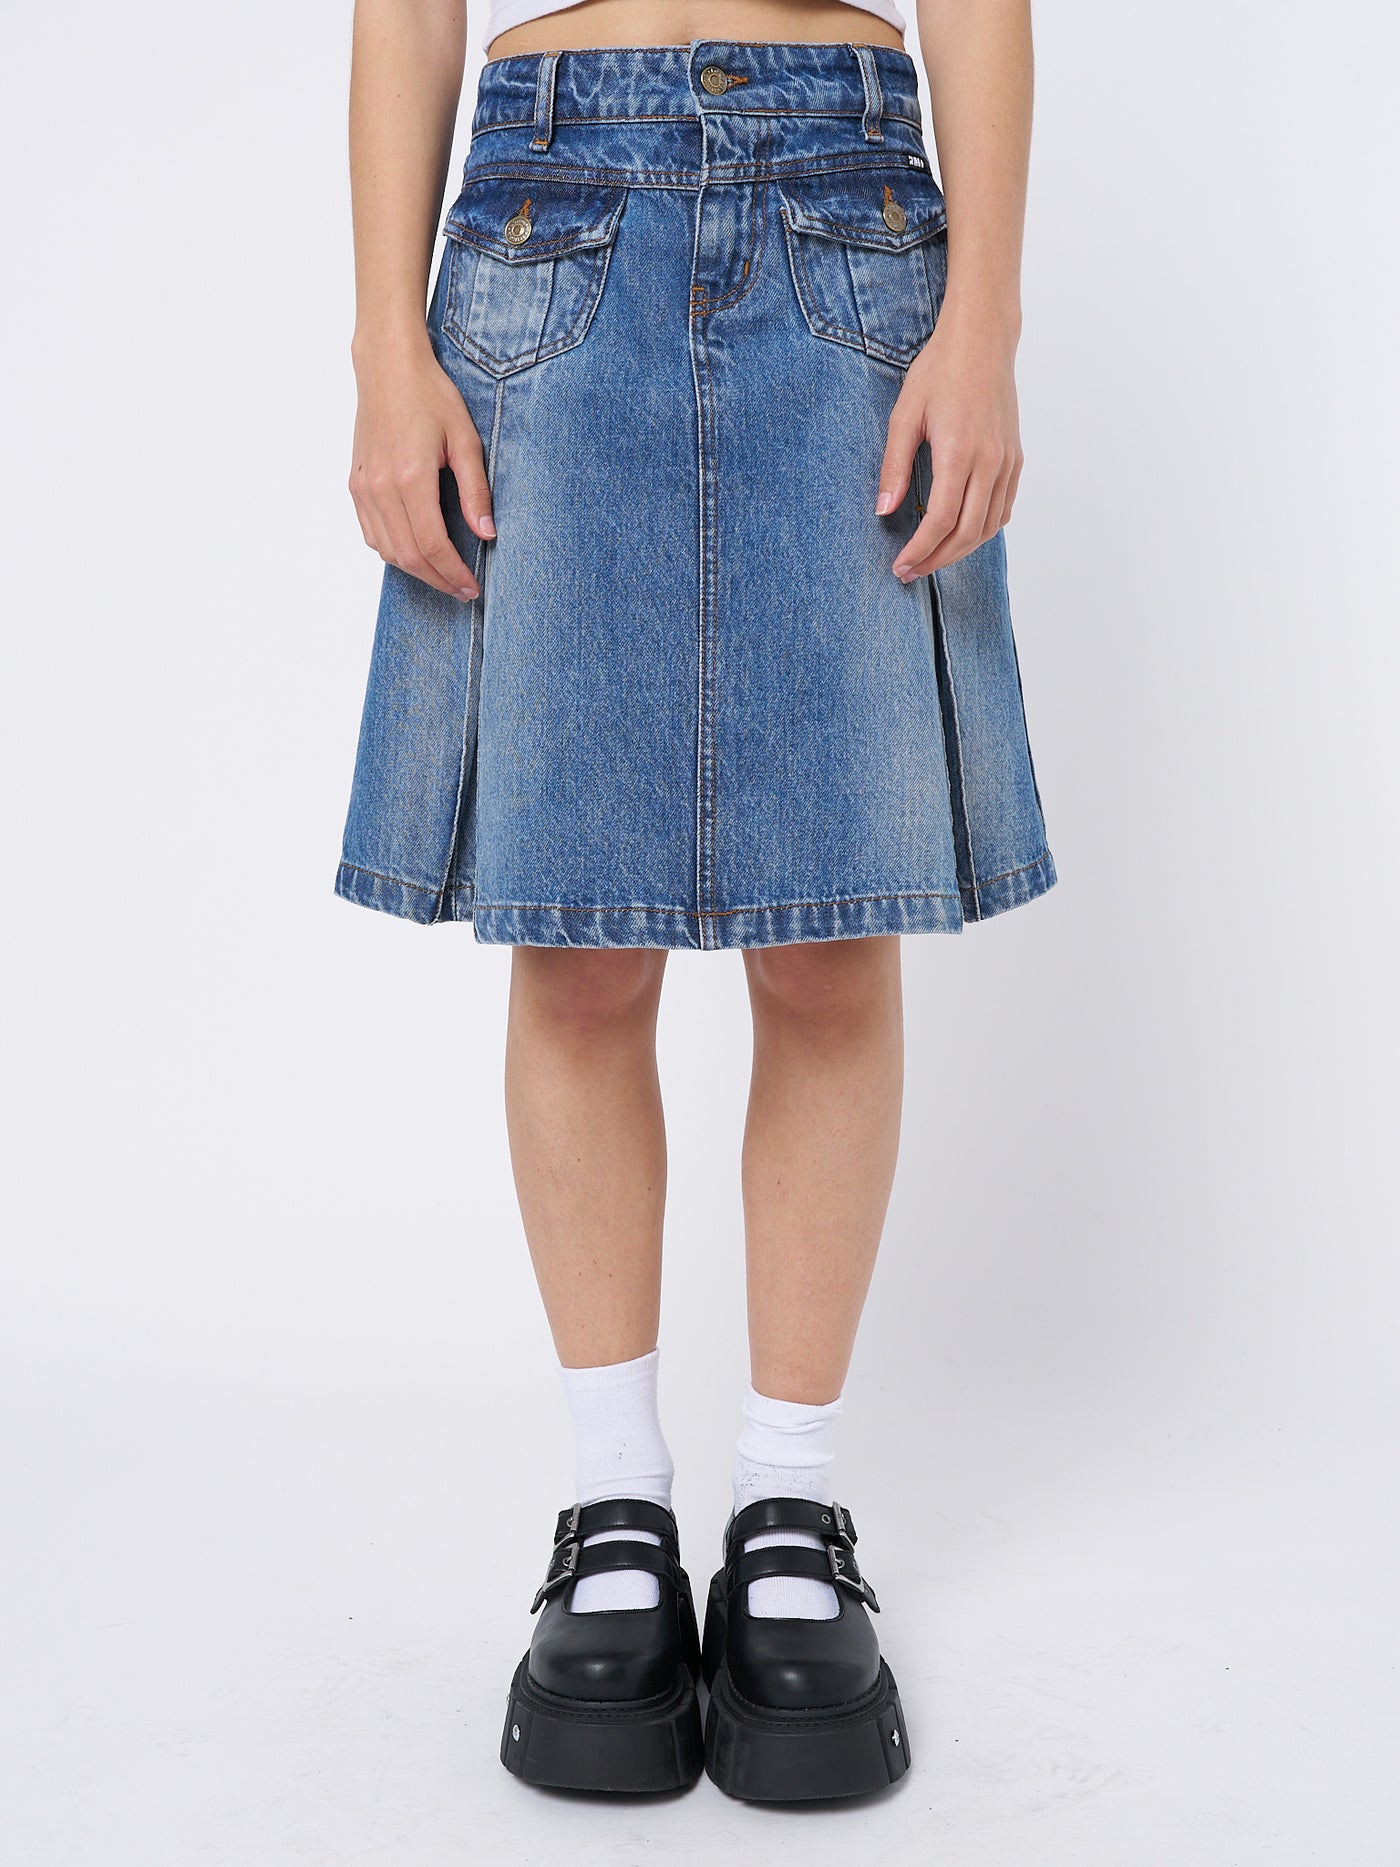  Denim pleated midi skirt by Minga London. Flared silhouette with a blue wash. Versatile and stylish for various occasions.